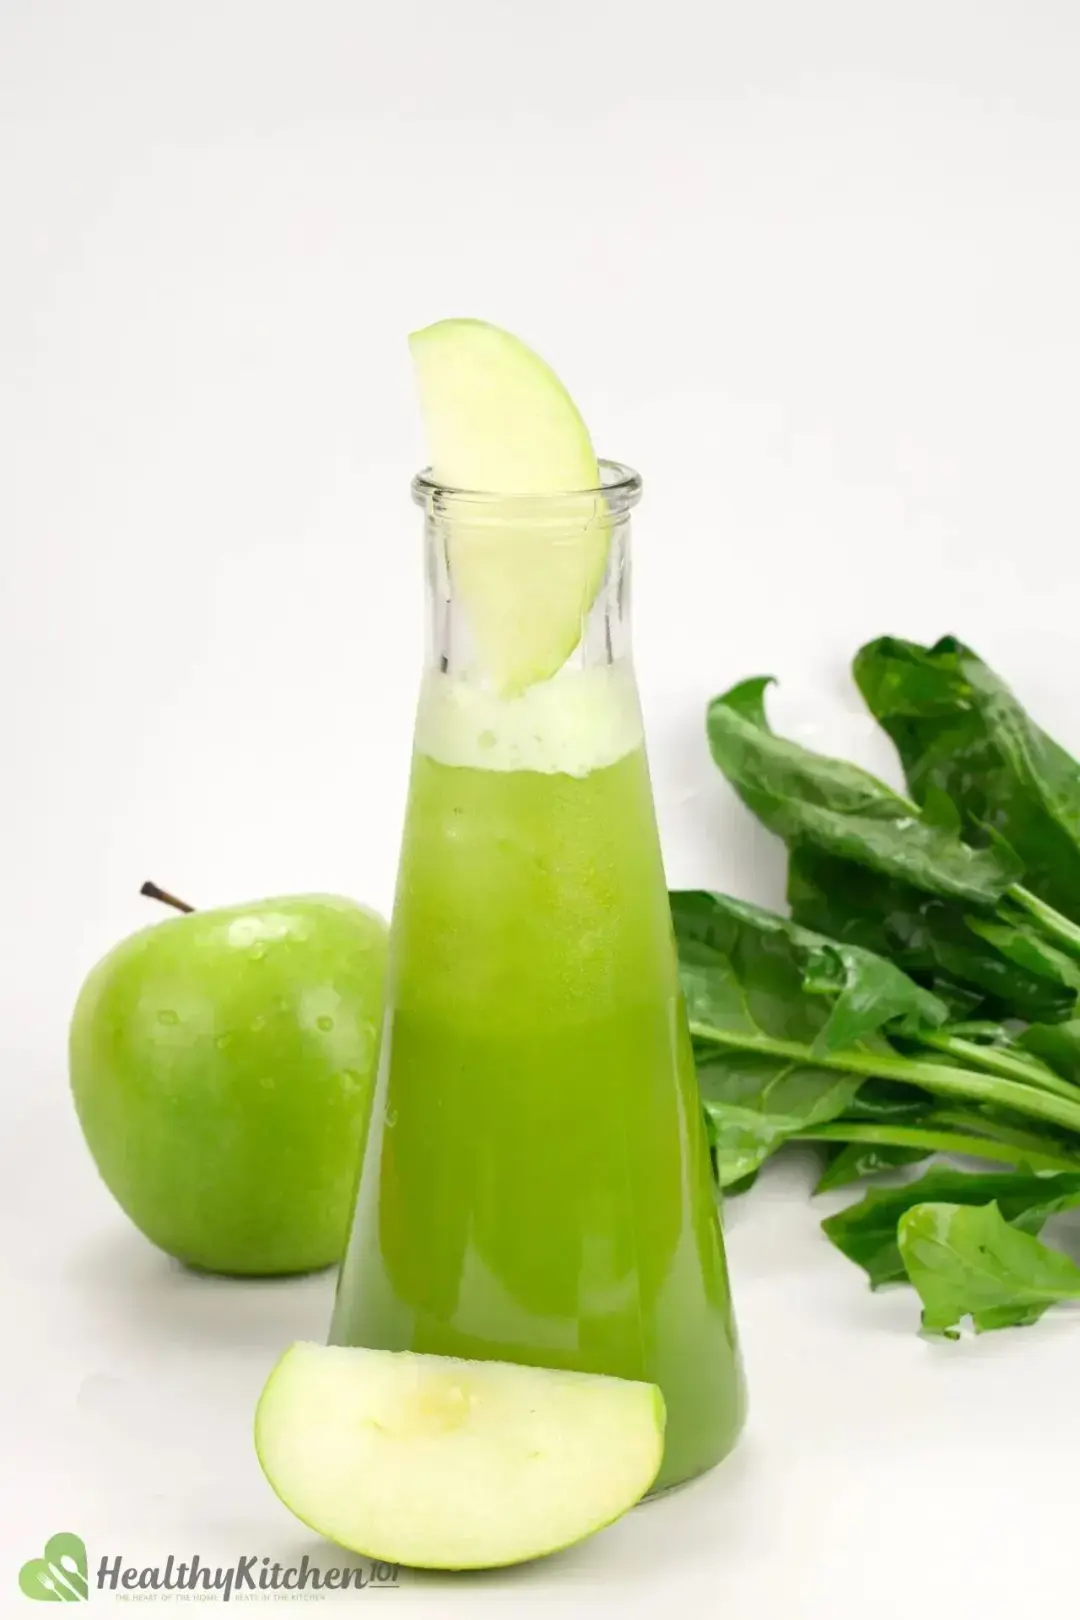 A bottle-neck bottle of green apple juice with an apple wedge, green apple, and some spinach leaves around